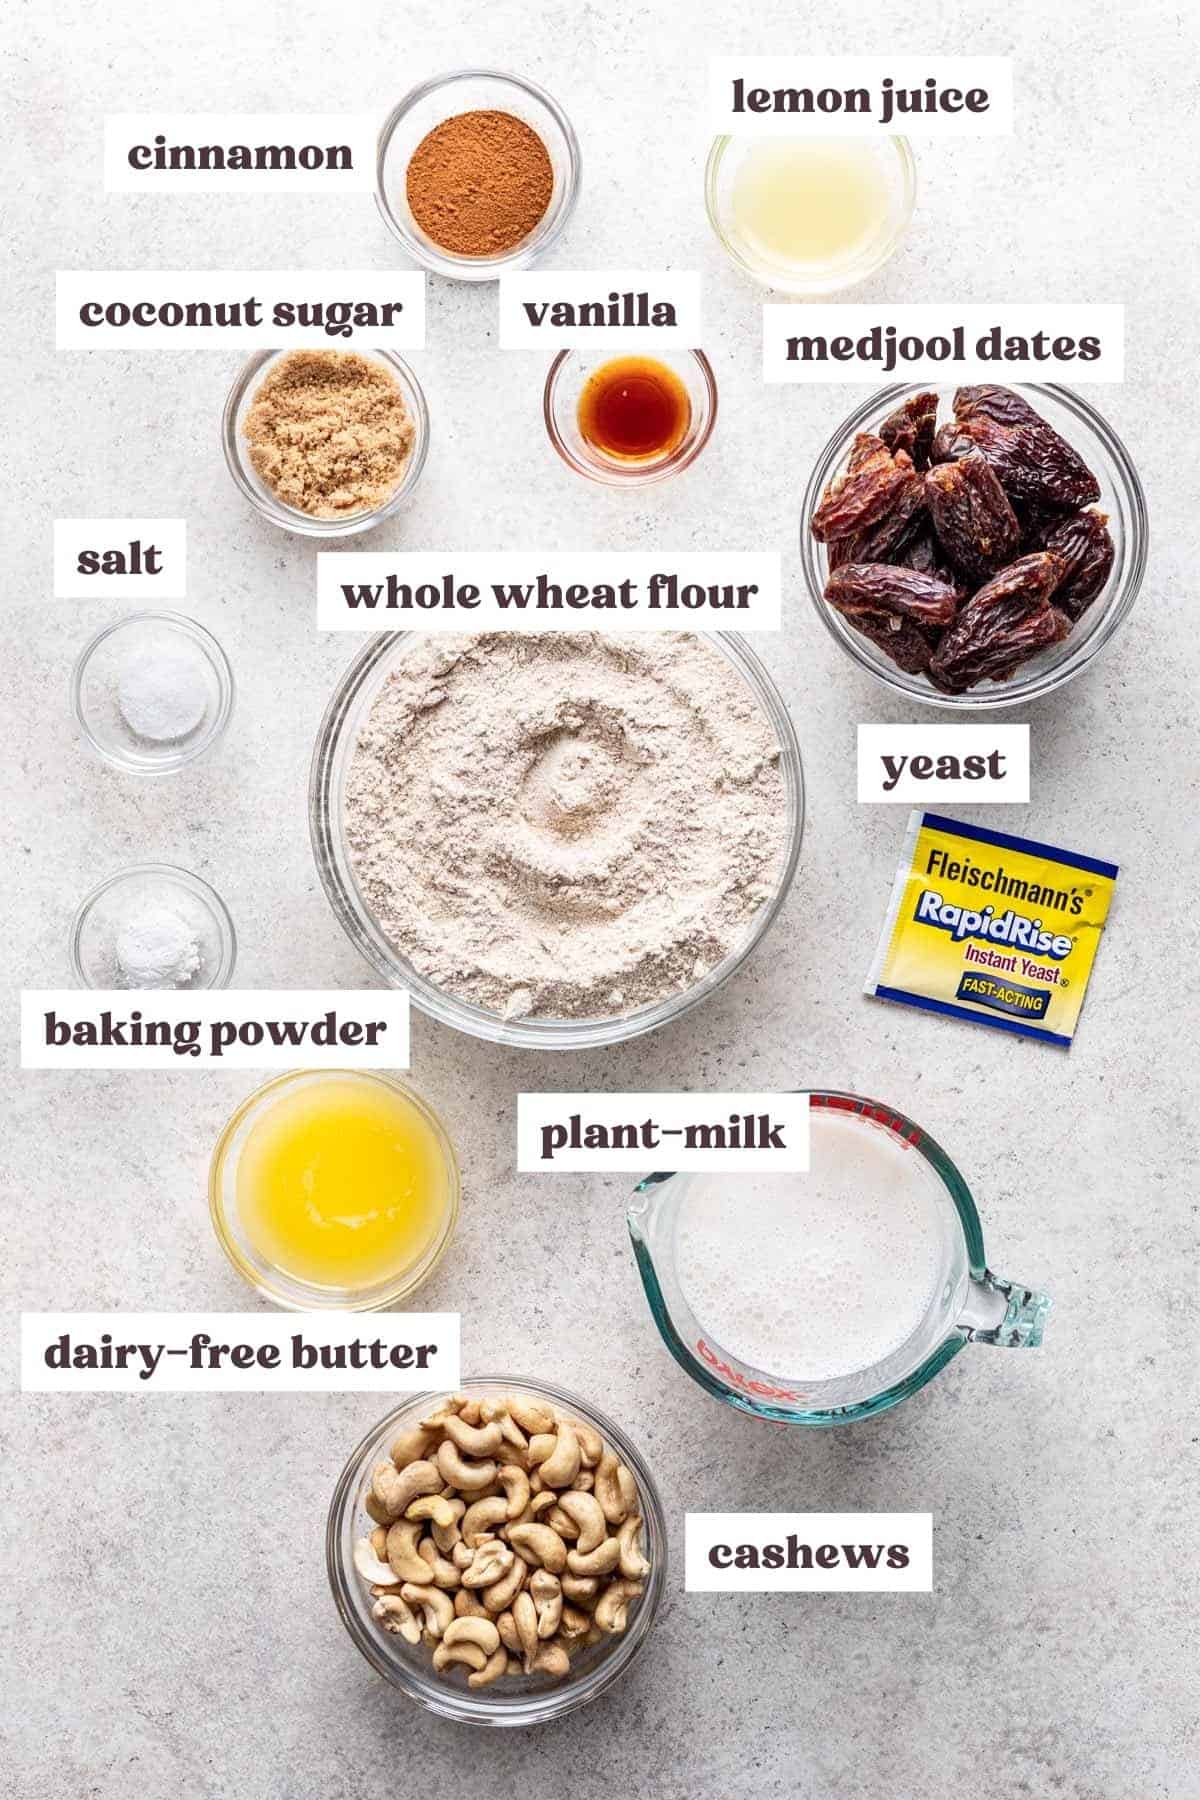 Overview of the ingredients you will need to make this whole wheat cinnamon rolls recipe and homemade frosting. Ingredients are measured and labeled in small glass bowls.